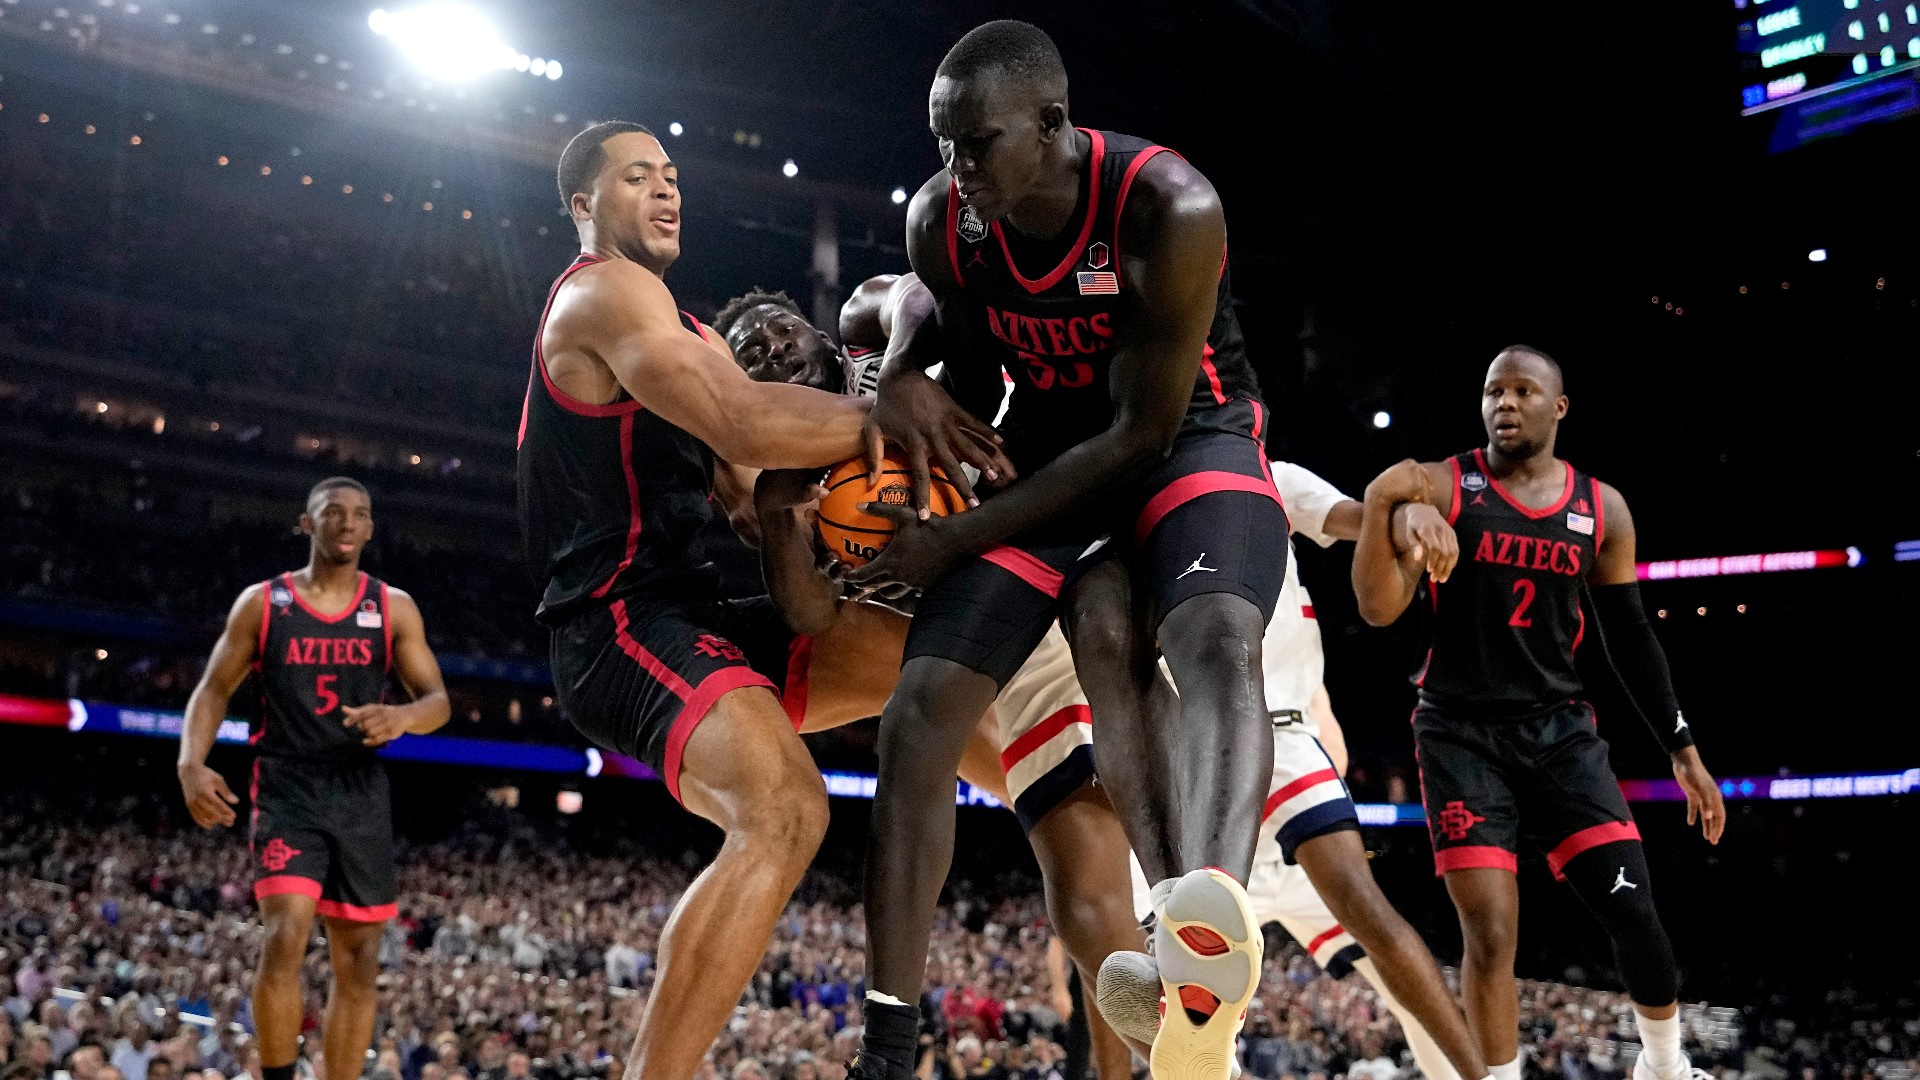 The San Diego State Men’s season came to an end after a loss to a strong UConn team in NCAA title game, UConn wins their fifth NCAA title.